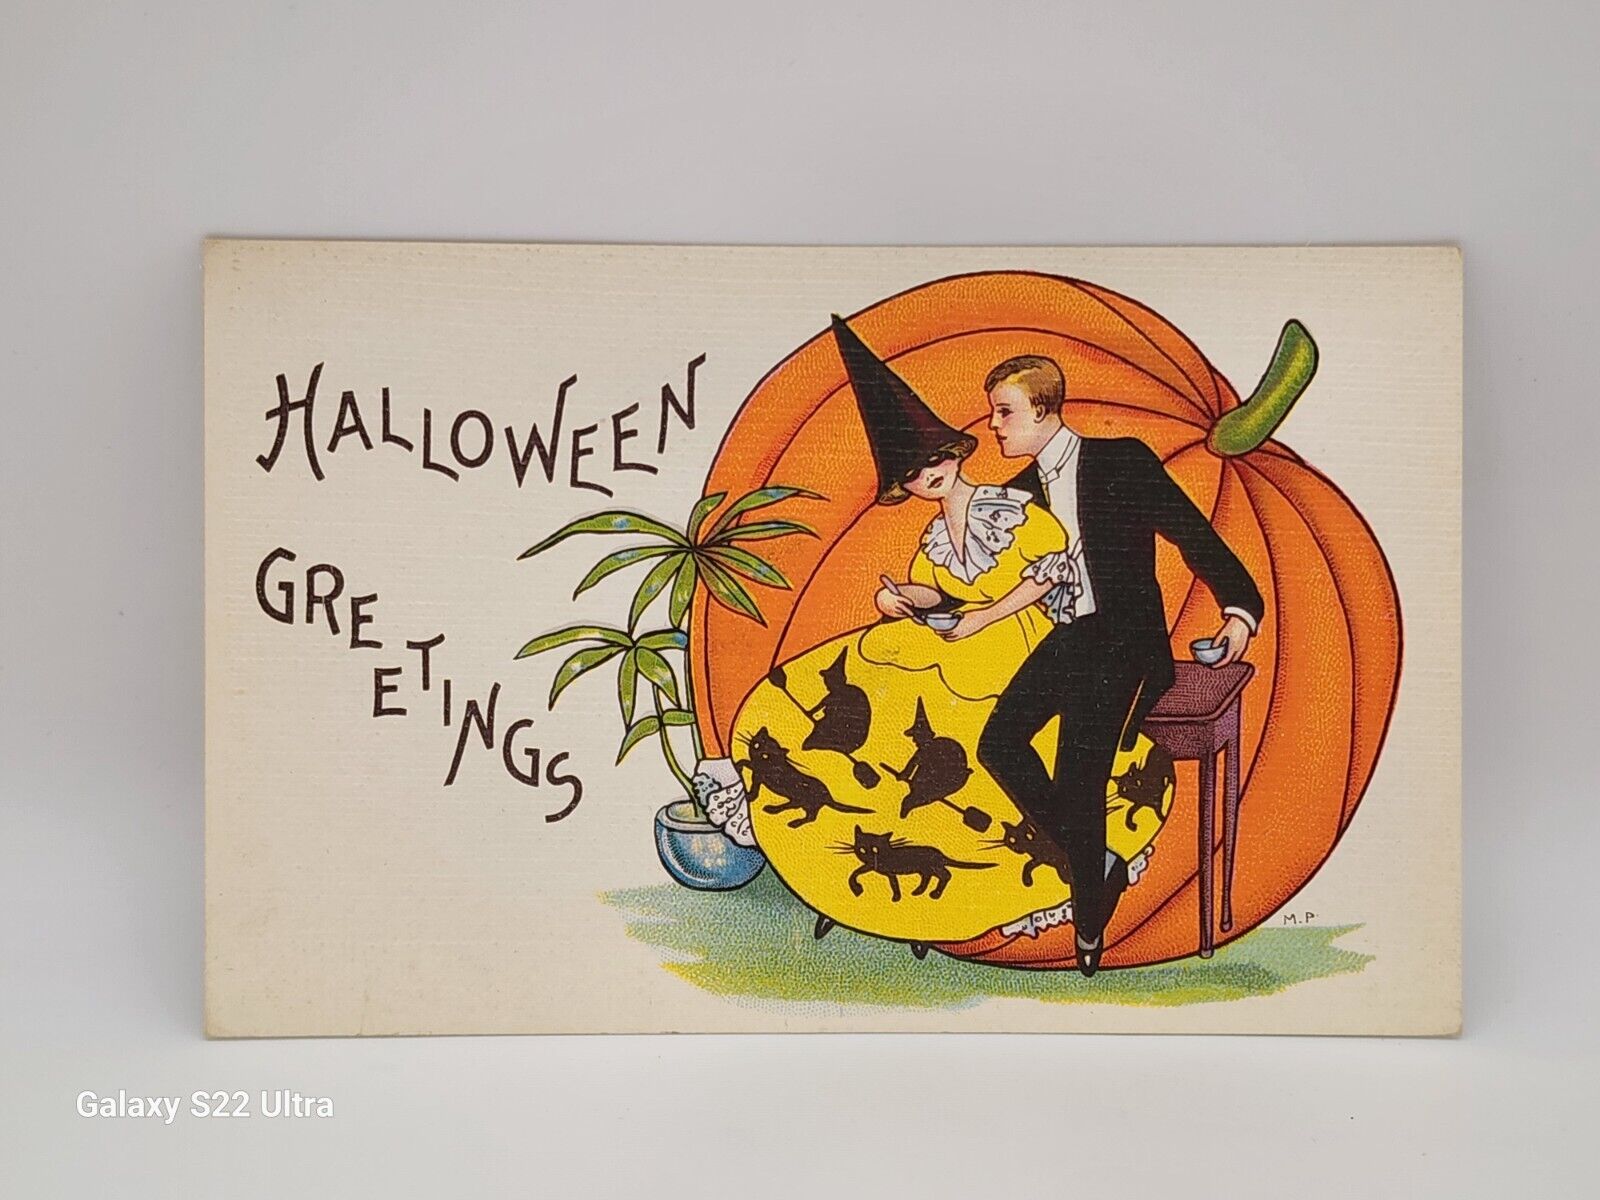 VINTAGE STECHER HALLOWEEN GREETINGS POSTCARD COUPLE DANCING CATS ON DRESS #419A